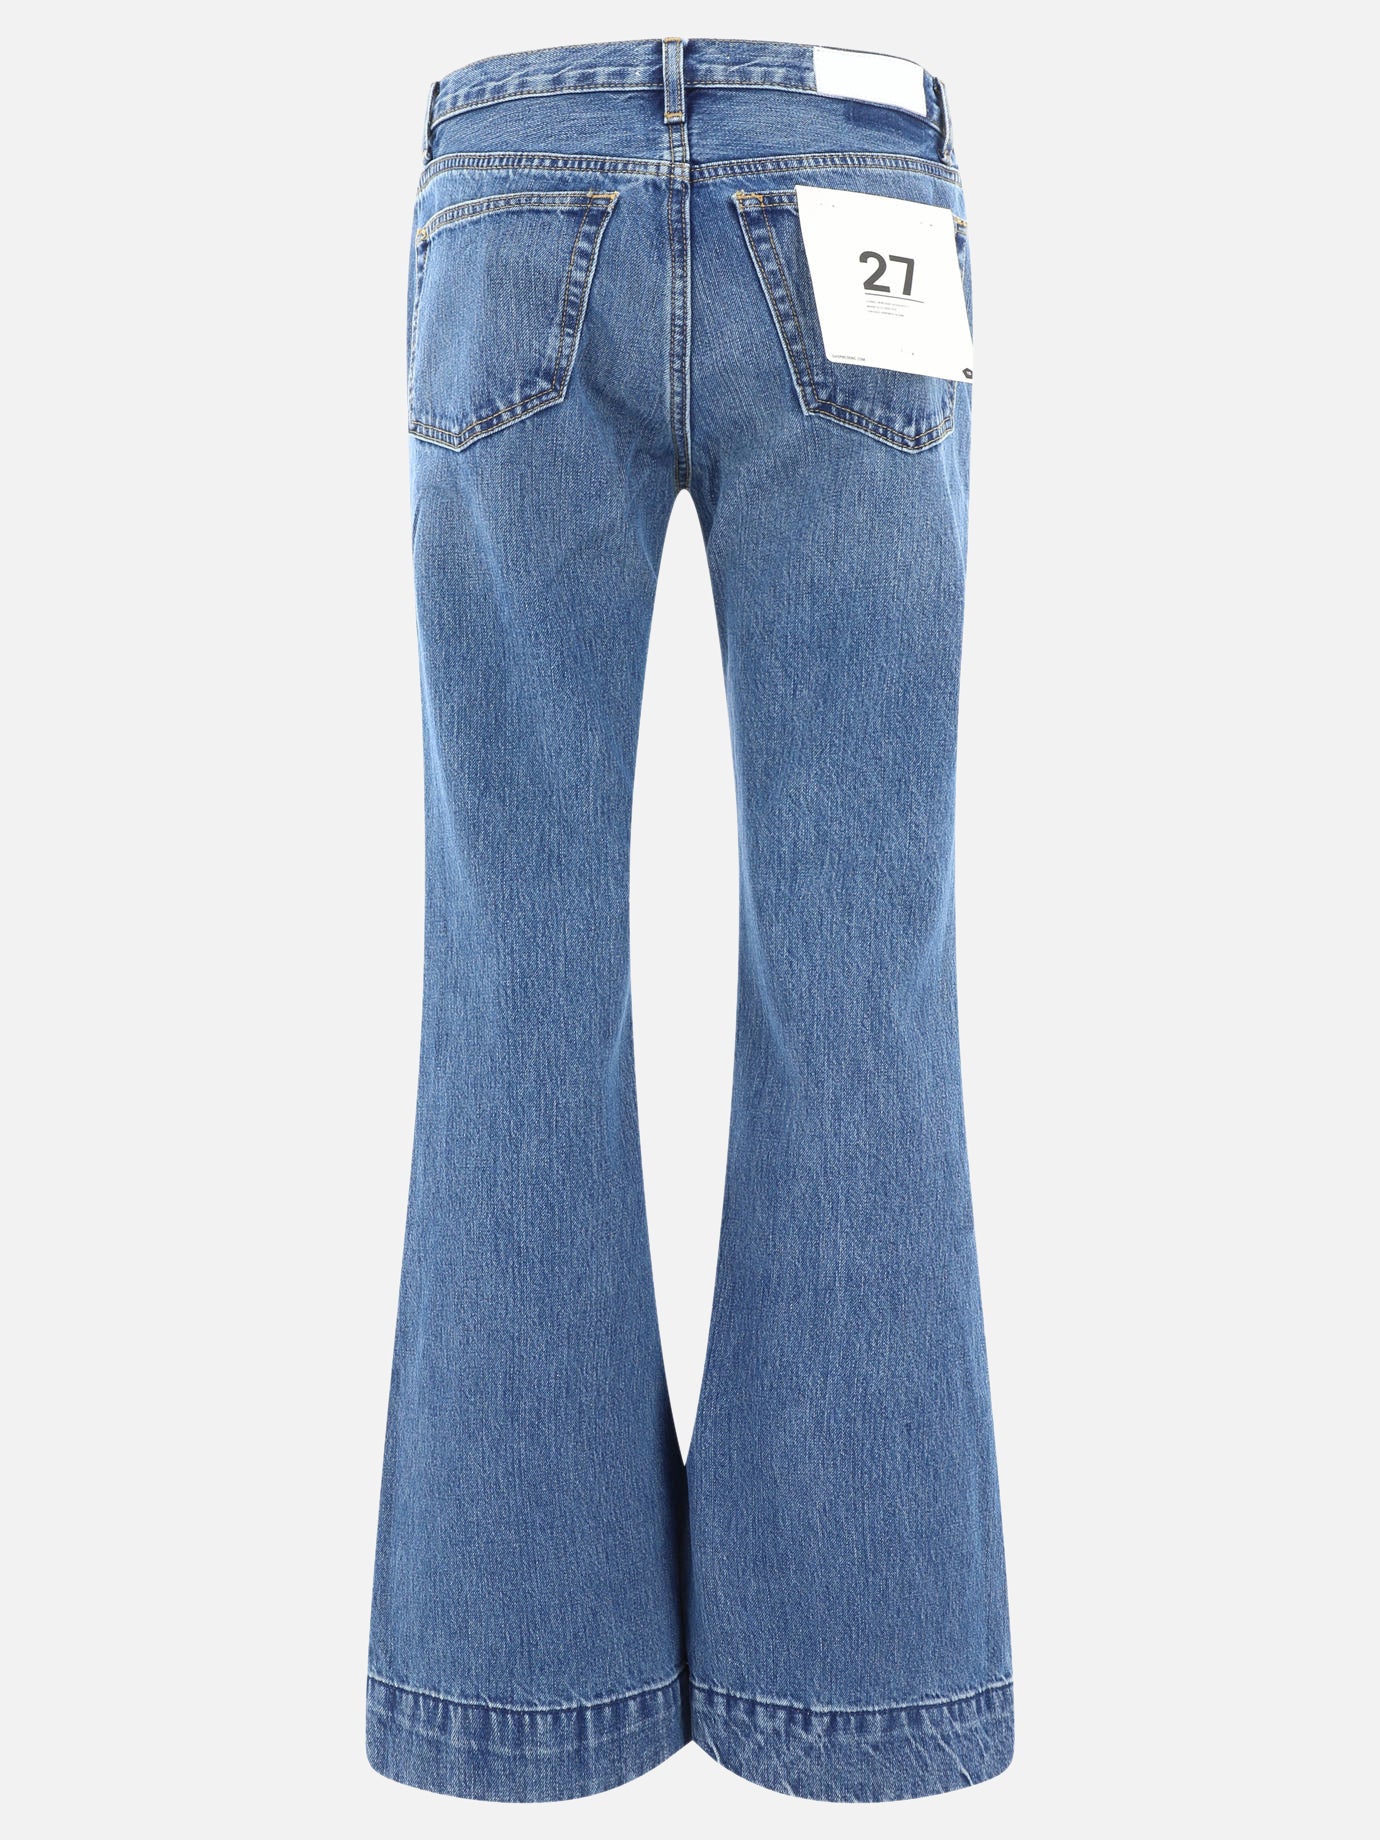 "70's" jeans